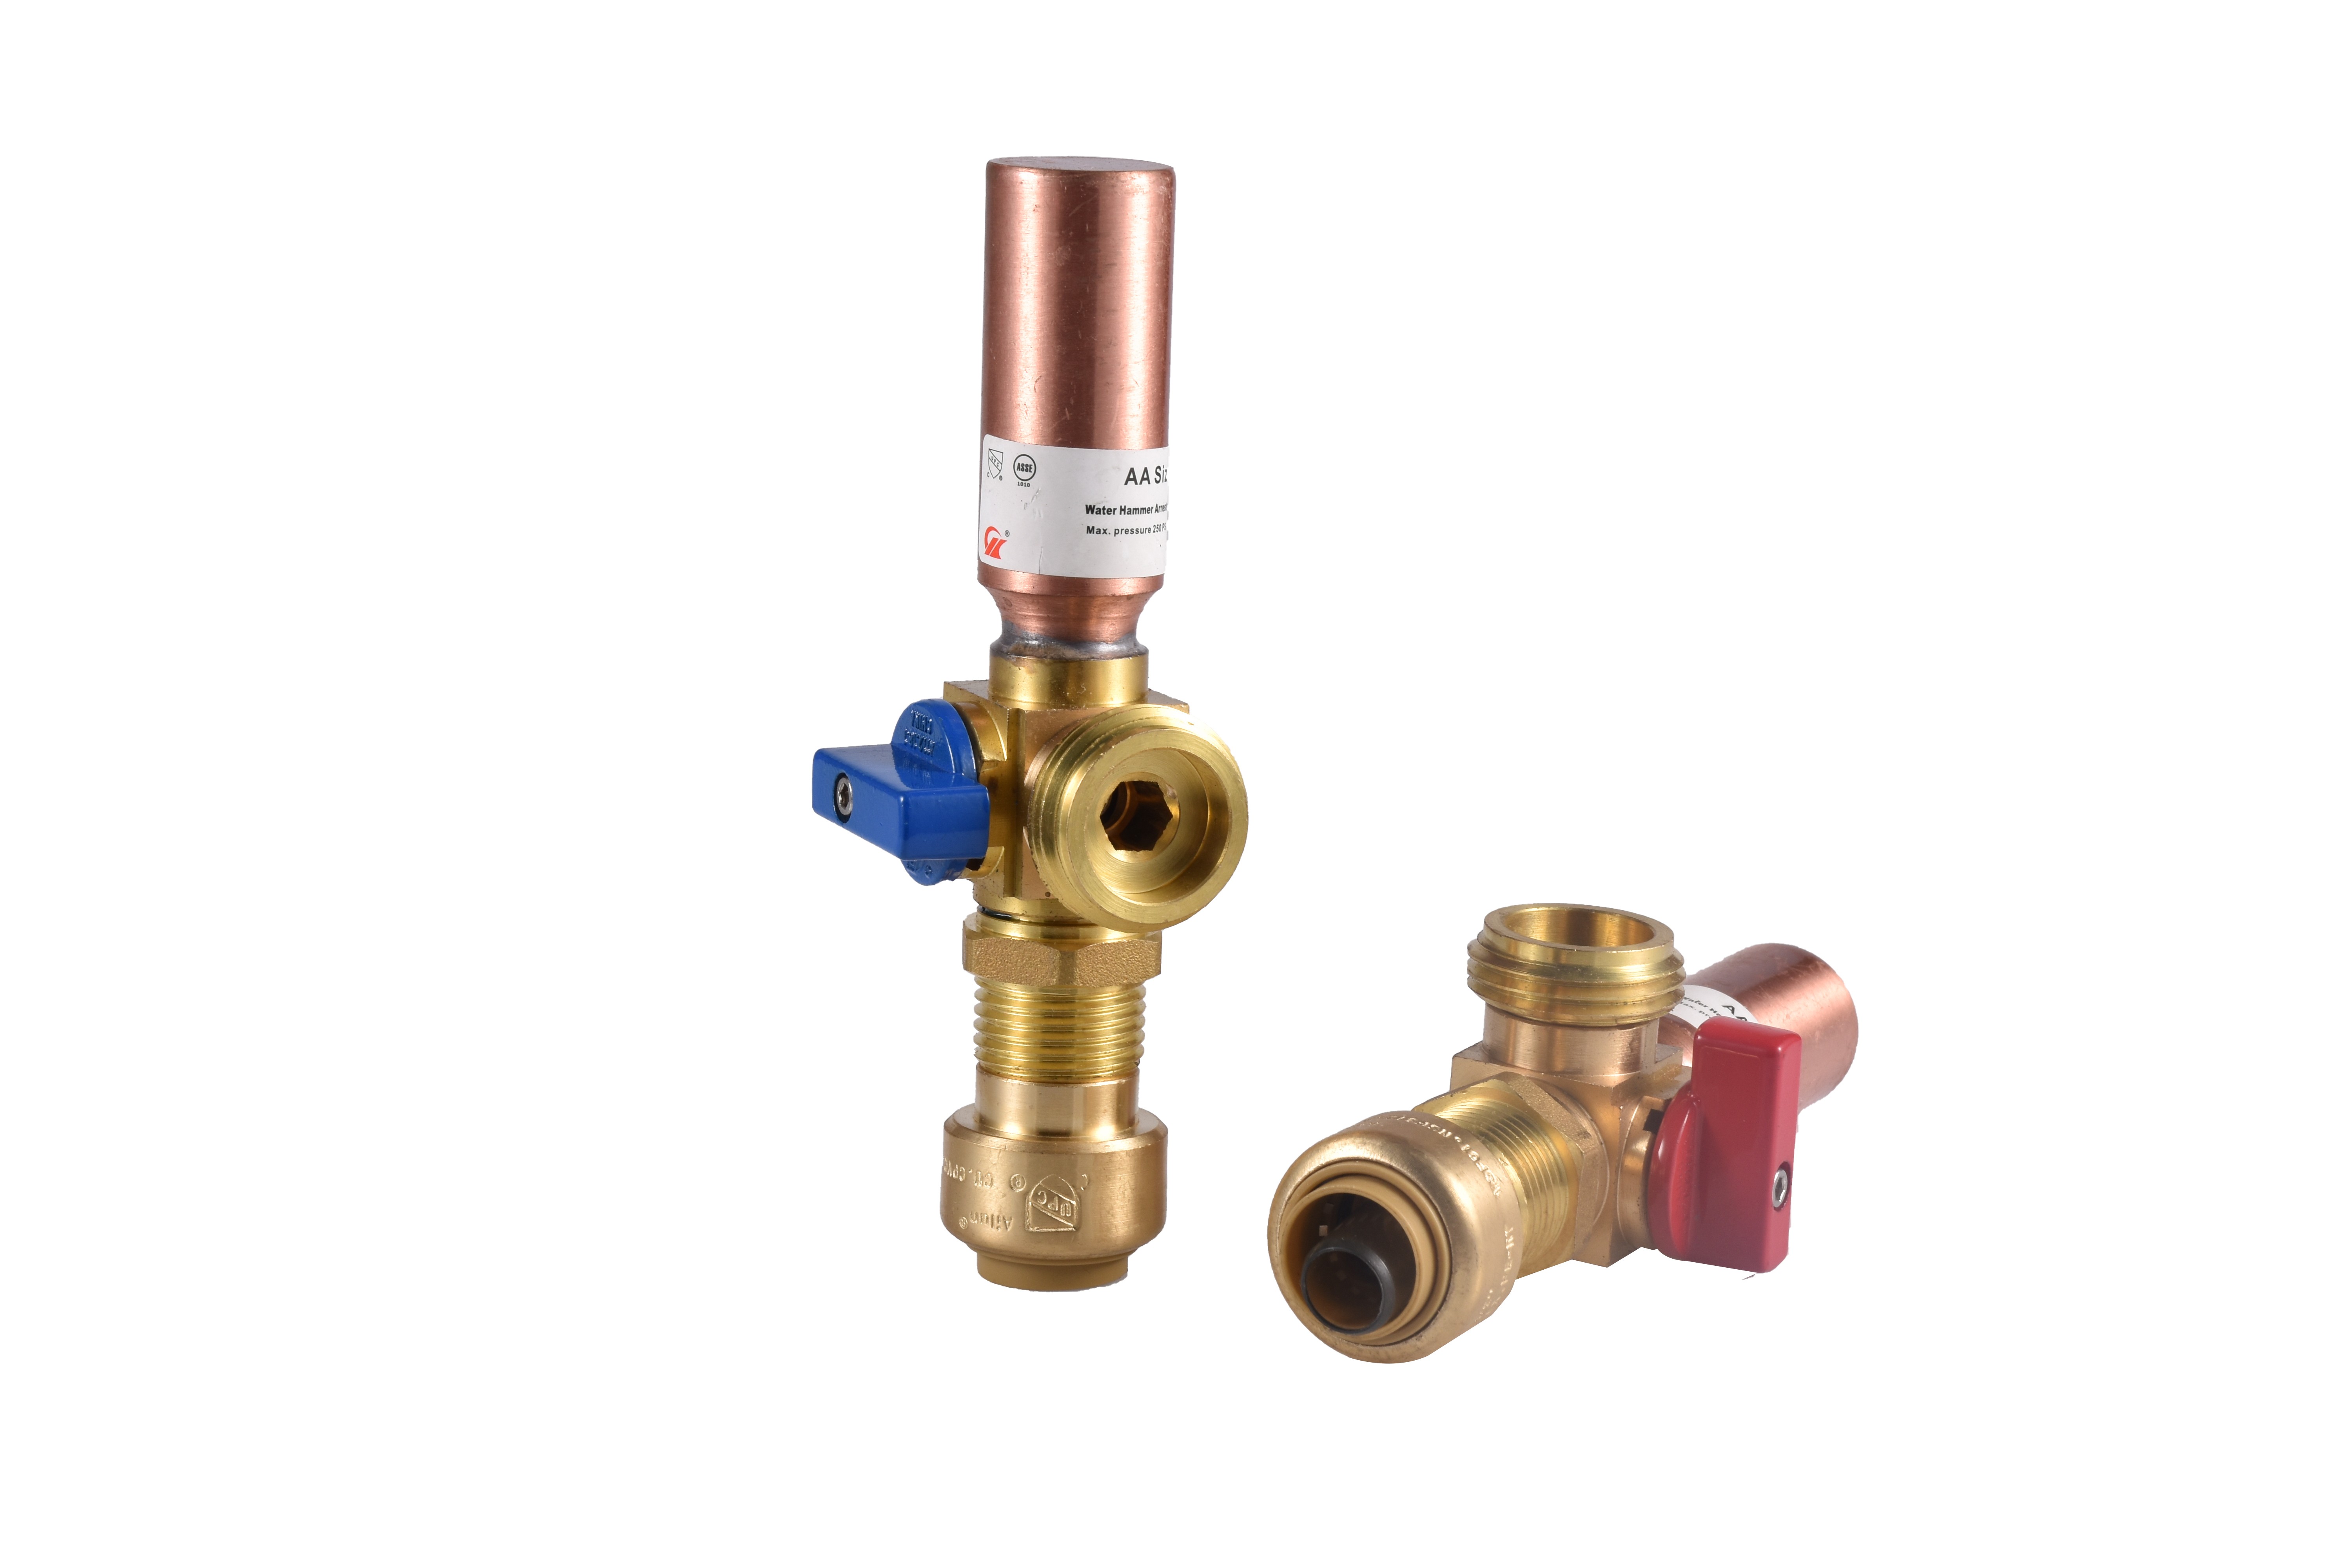 Valve with Copper Water Hammer Arrester 1/2" Pushfit/Sharkbite x 3/4" MHT Left Blue and Right Red Handle